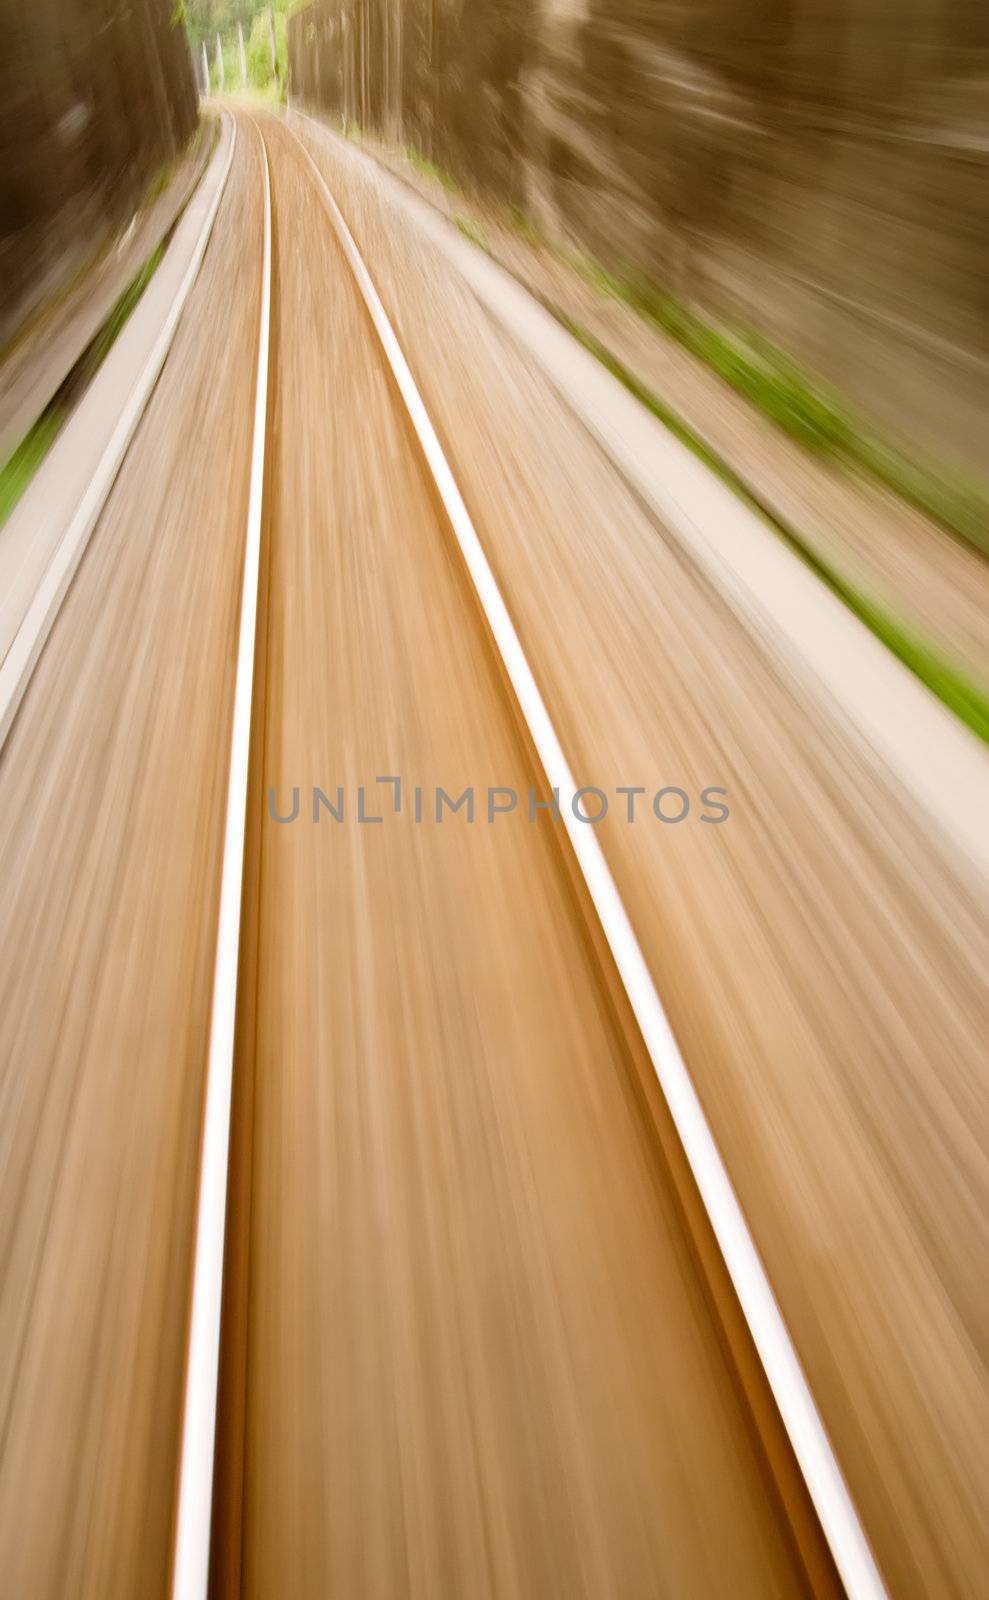 It is railway track with high speed motion blur.